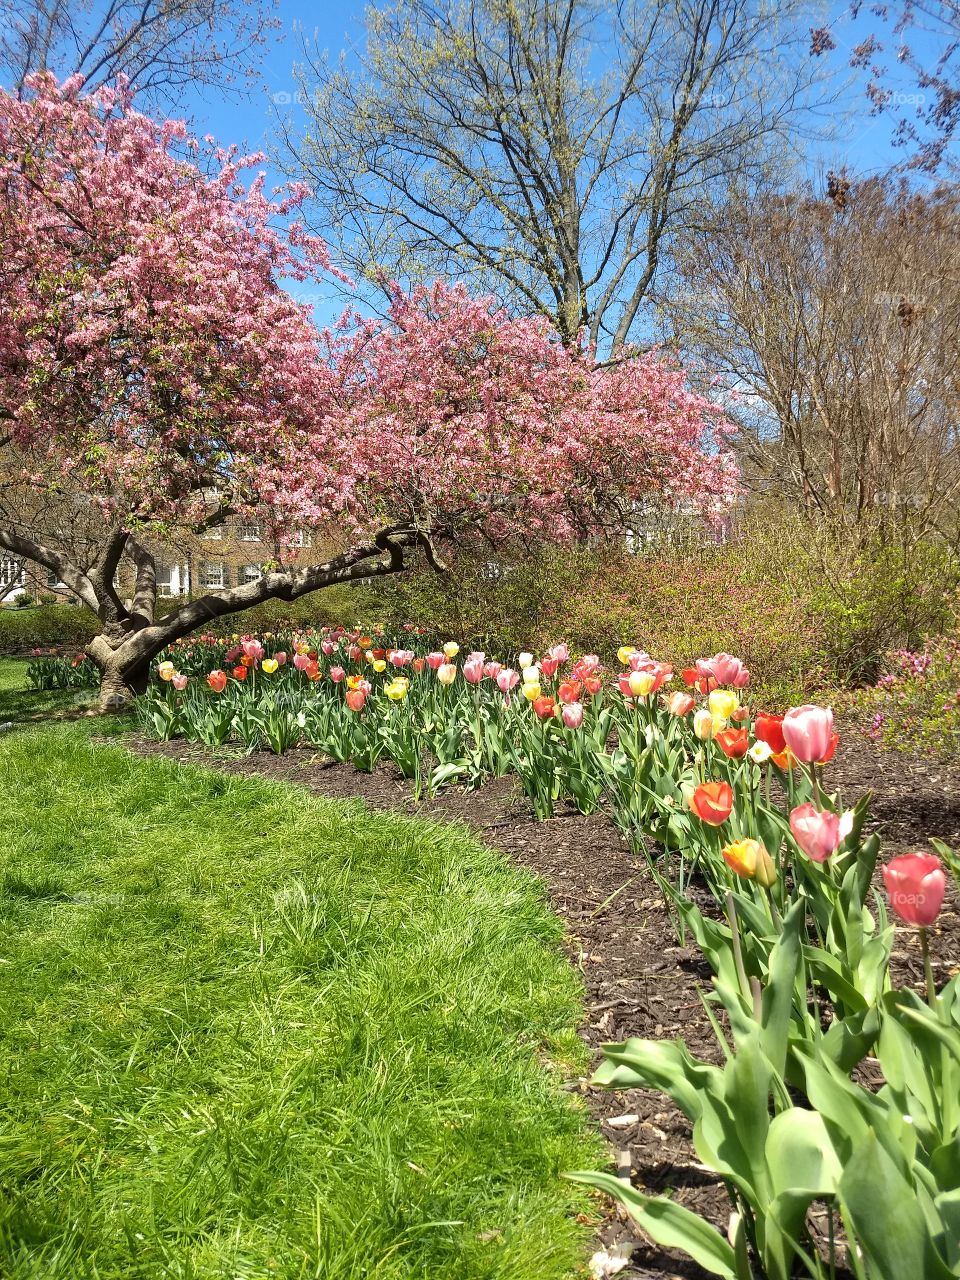 nmulticolored tulips in spring garden with delicate  pink blooms  of flowering cherry tree. Sherwood   Gardens in the  Guilford Community of Baltimore Maryland.  An Urban Oasis in a historic neighborhood of Maryland